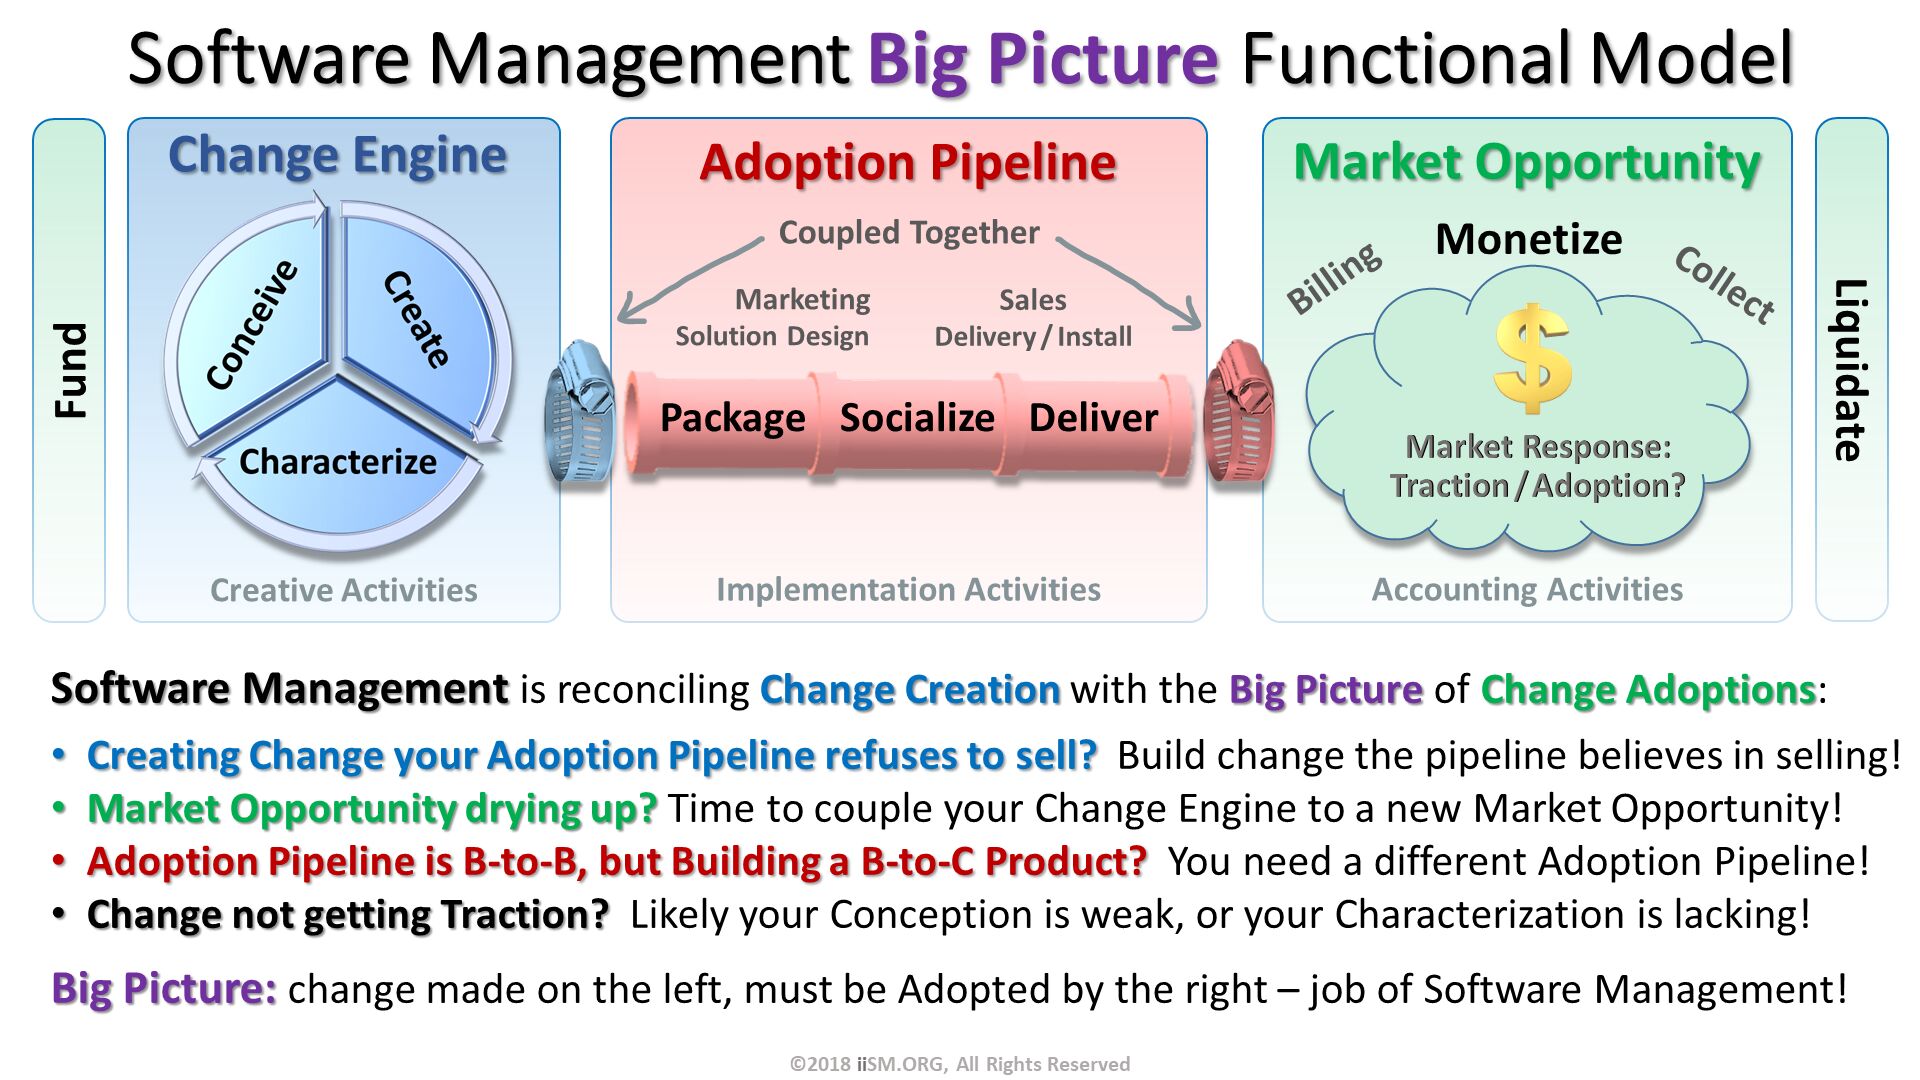 Software Management Big Picture Functional Model. Software Management is reconciling Change Creation with the Big Picture of Change Adoptions:
Creating Change your Adoption Pipeline refuses to sell?  Build change the pipeline believes in selling!
Market Opportunity drying up? Time to couple your Change Engine to a new Market Opportunity!
Adoption Pipeline is B-to-B, but Building a B-to-C Product?  You need a different Adoption Pipeline!
Change not getting Traction?  Likely your Conception is weak, or your Characterization is lacking!
Big Picture: change made on the left, must be Adopted by the right – job of Software Management!. ©2018 iiSM.ORG, All Rights Reserved. 